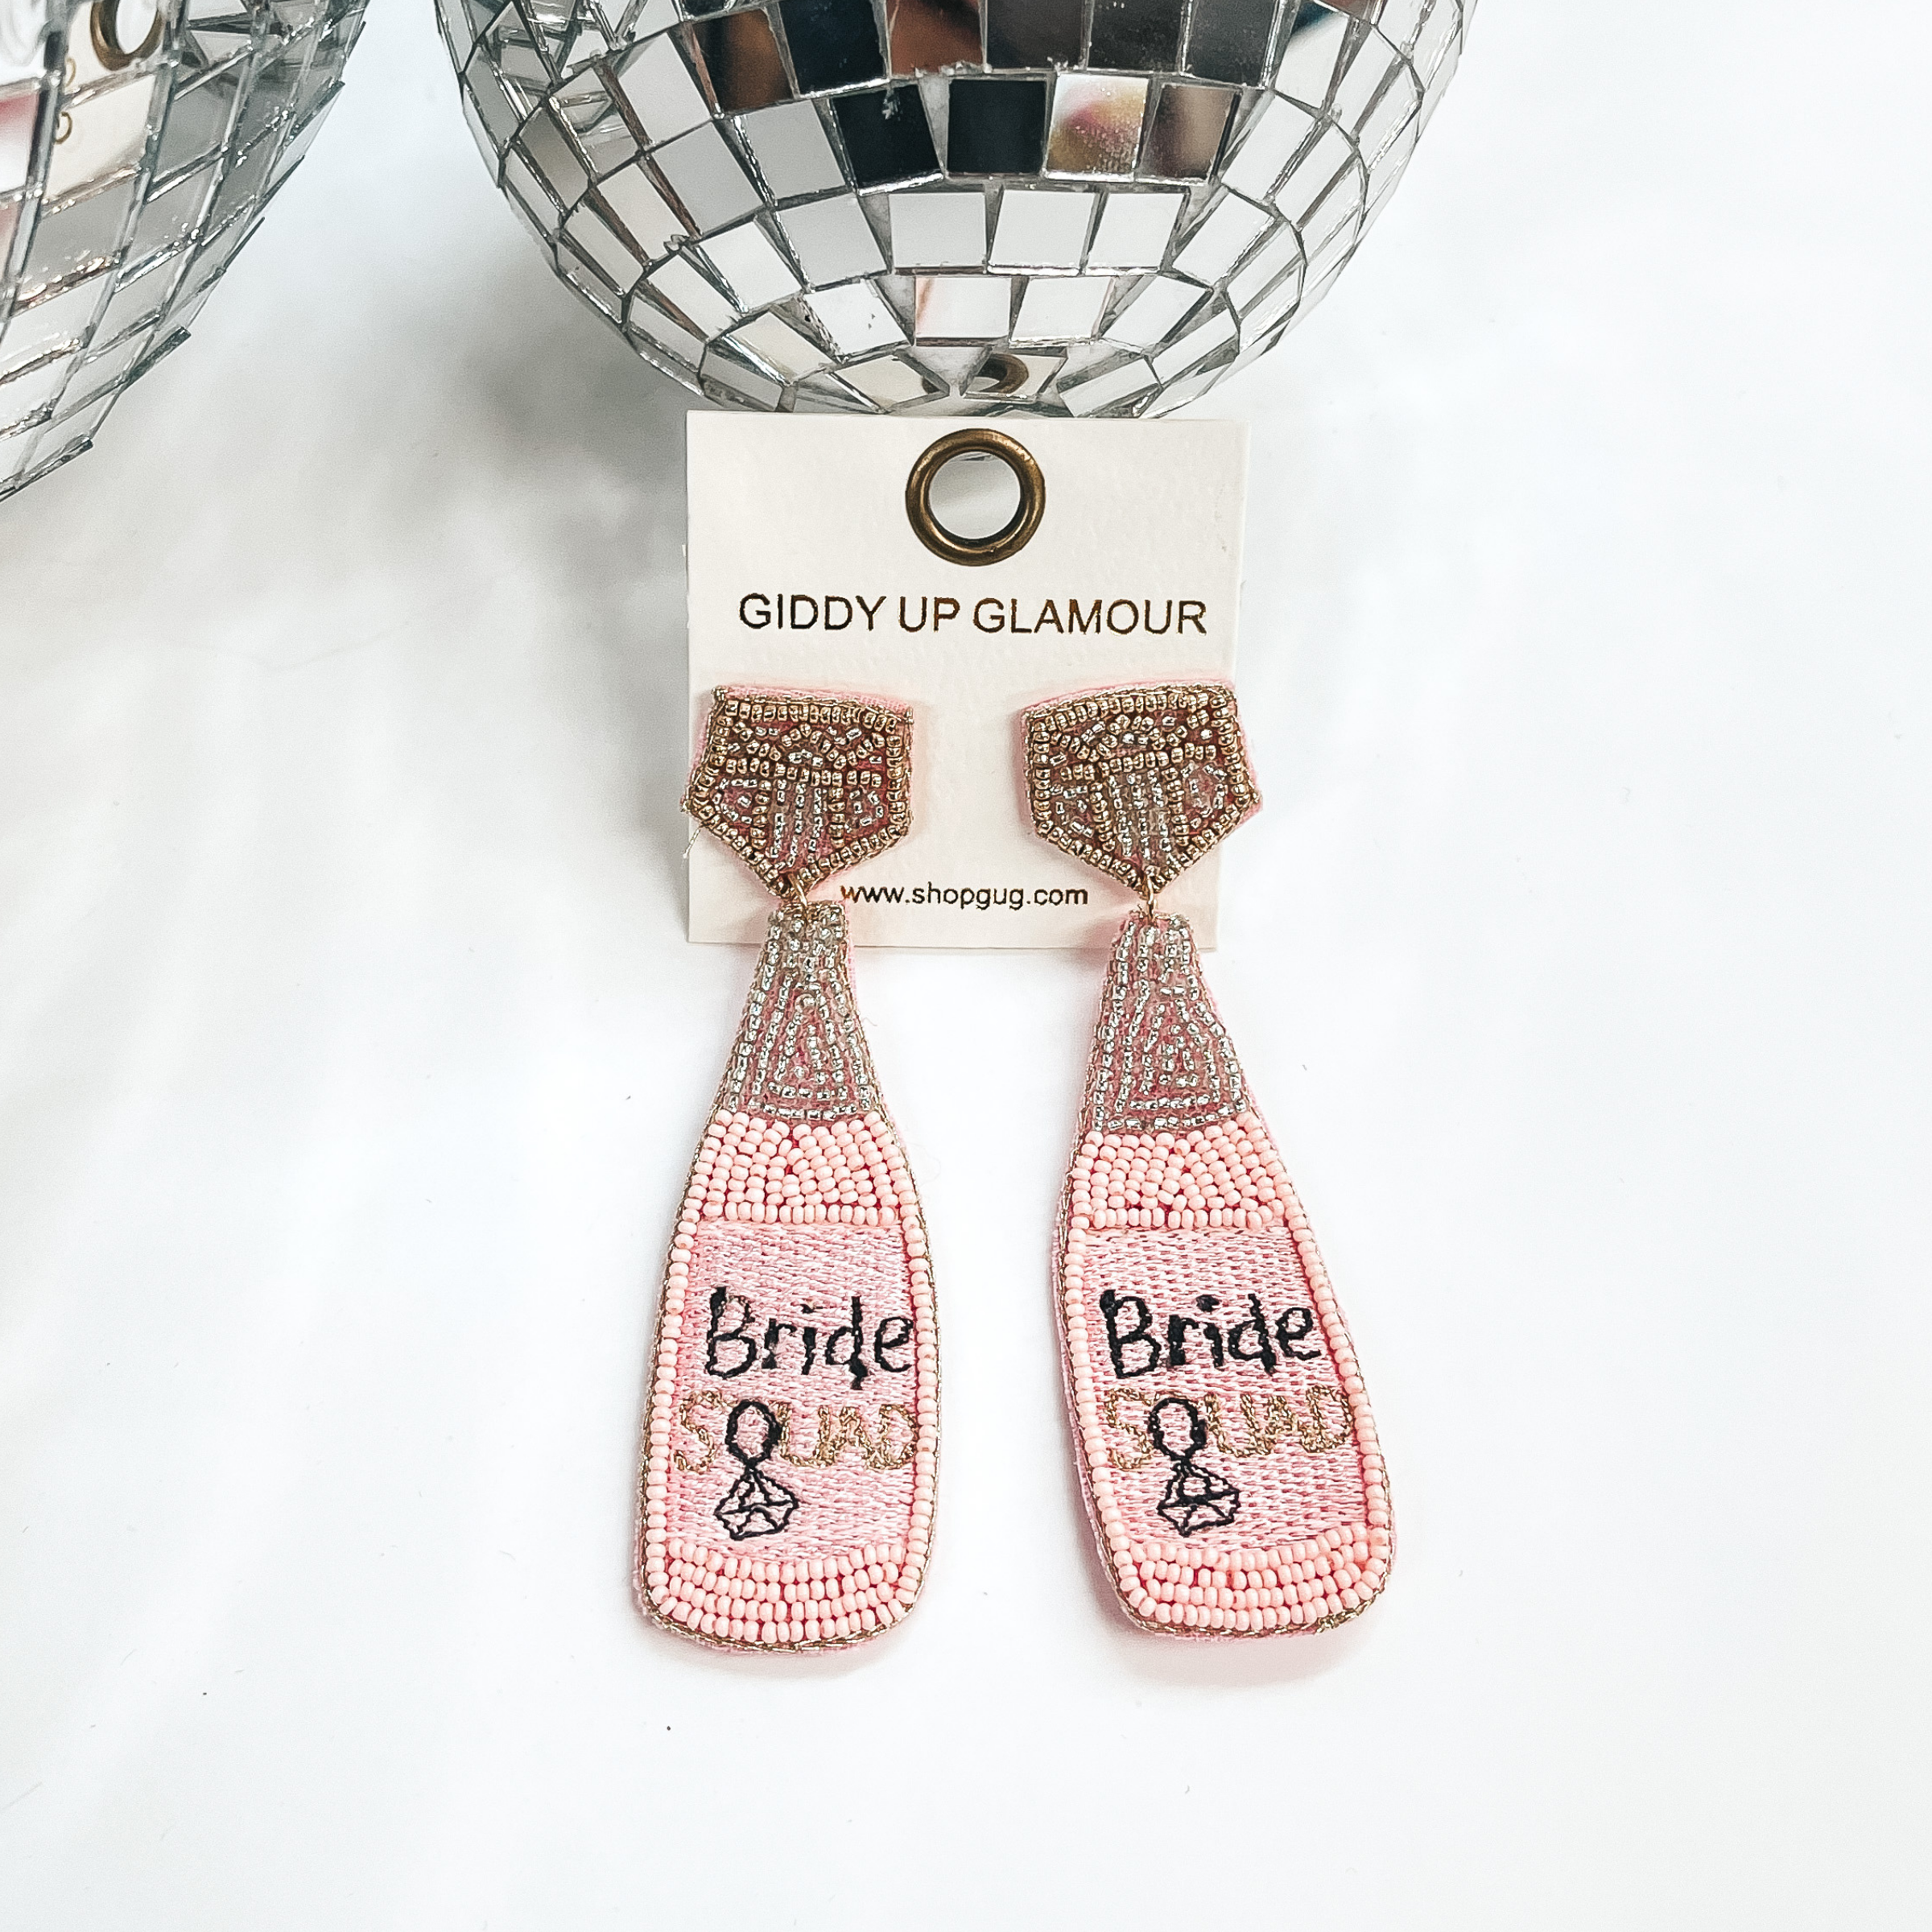 Post back earrings with a bottle drop in light pink,  gold, and silver beads. The stud part has a  diamond shape in beads, the bottle has the saying  'Bride Squad' with a diamond ring replacing the Q.  Taken on a white background with two disco balls in  the back as decor.